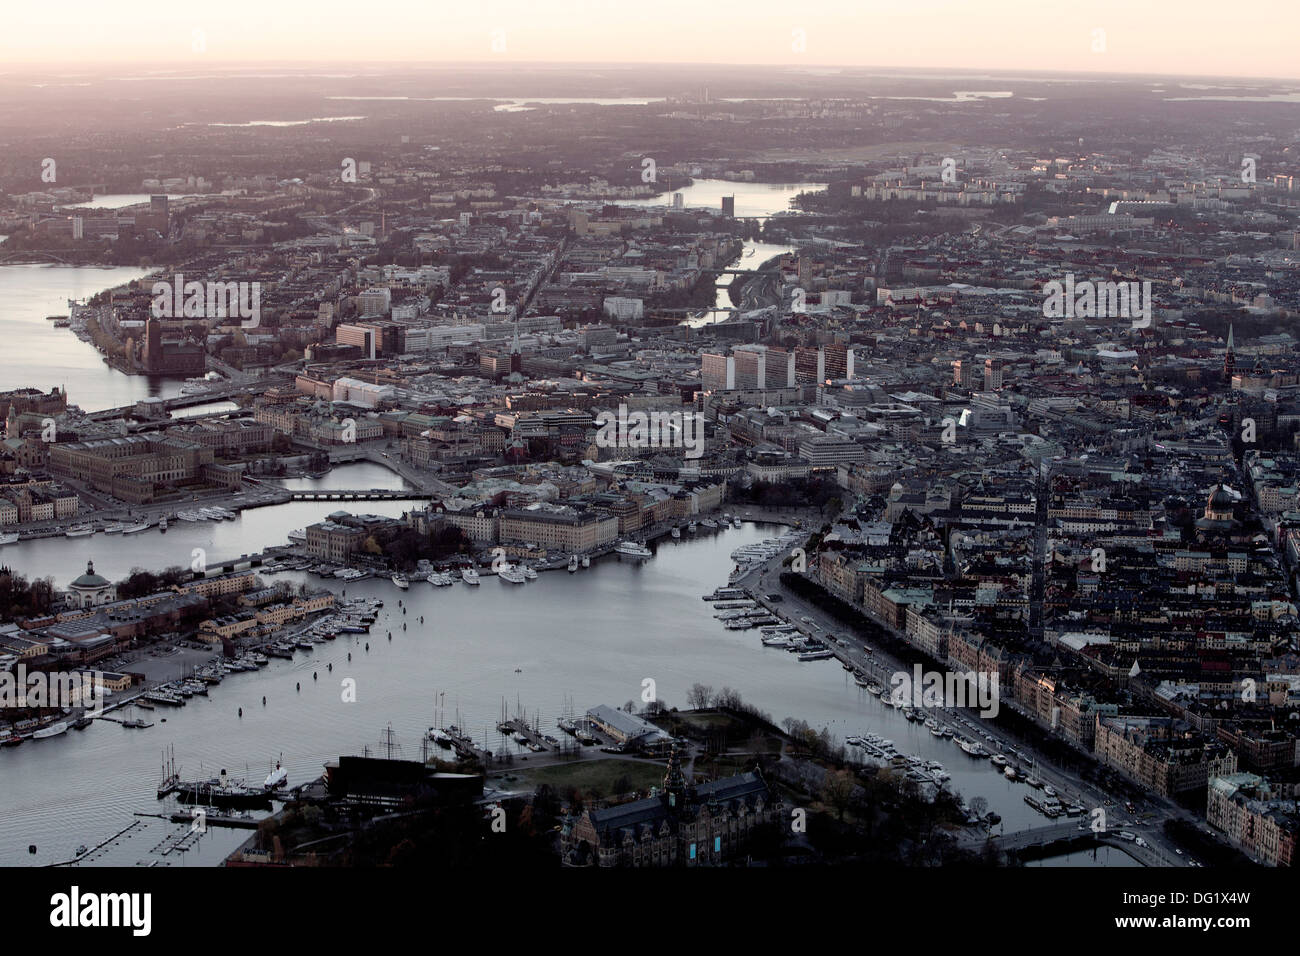 Cityscape at Dusk, High Angle View, Stockhom, Sweden Stock Photo